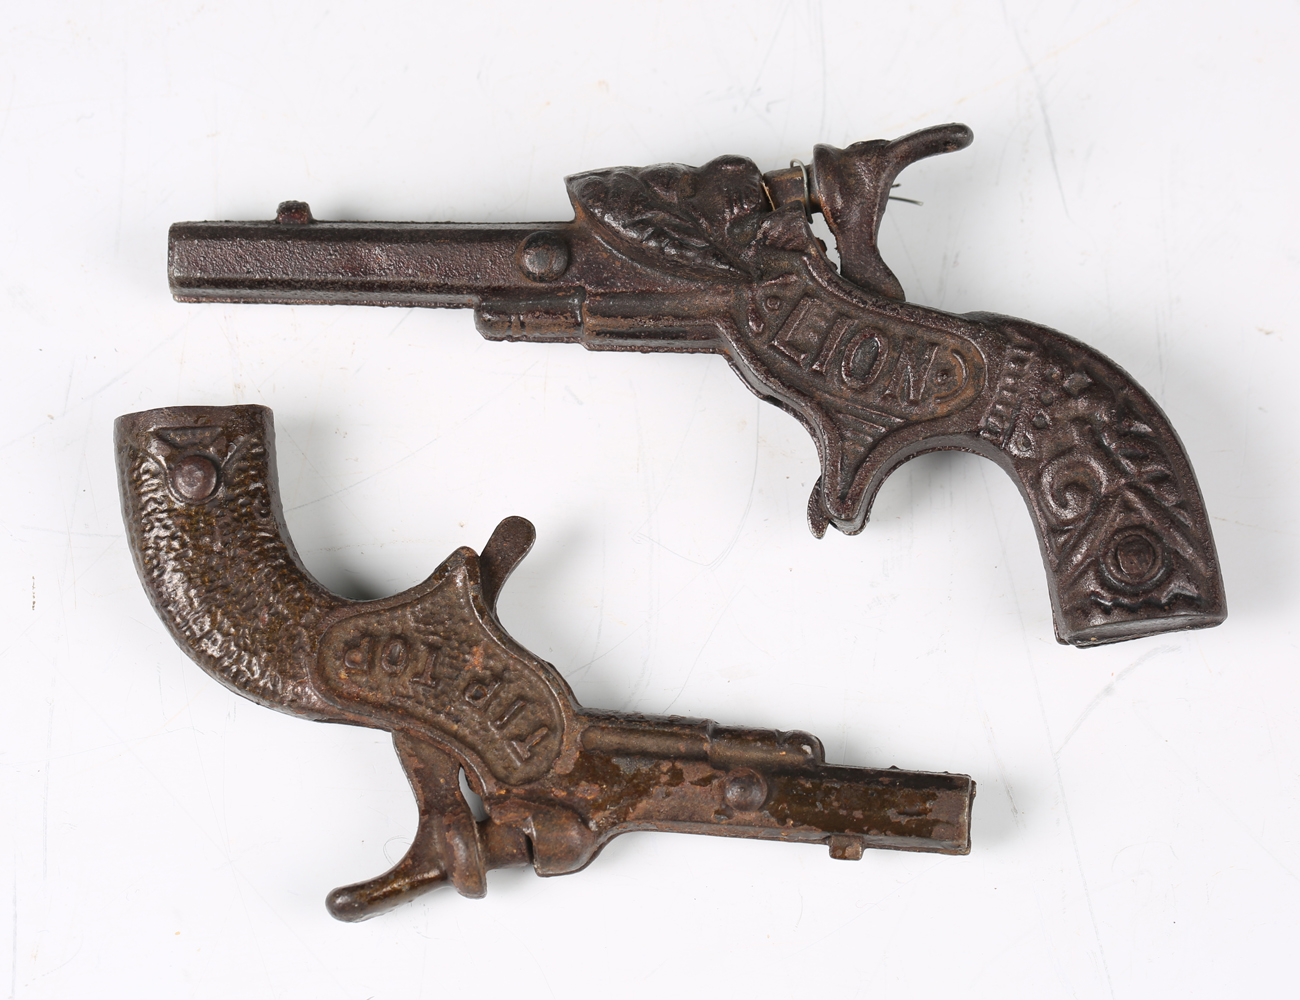 Two late 19th/early 20th century cast metal toy cap guns, one detailed 'Lion', length 13cm, the